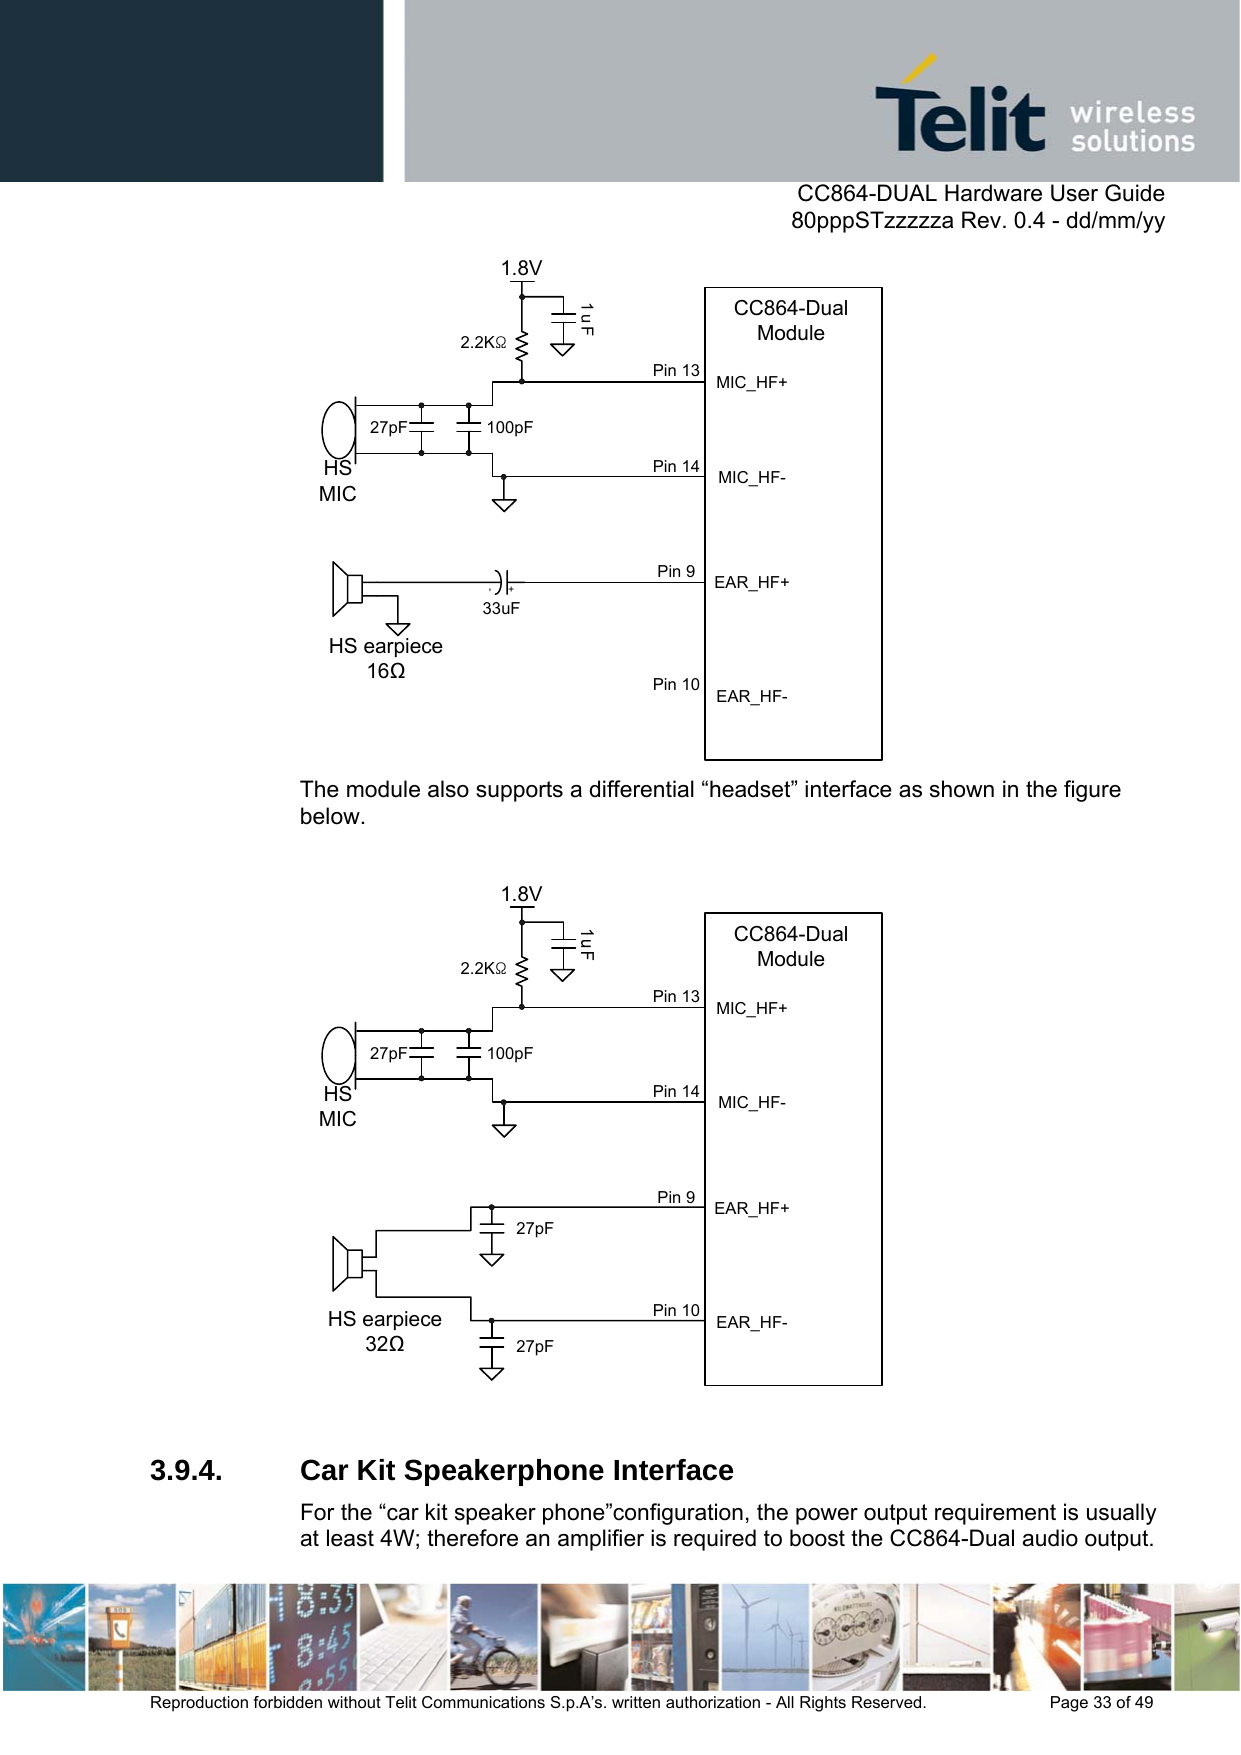      CC864-DUAL Hardware User Guide   80pppSTzzzzza Rev. 0.4 - dd/mm/yy   Reproduction forbidden without Telit Communications S.p.A’s. written authorization - All Rights Reserved.    Page 33 of 49  MIC_HF-1.8V1uFHS earpiece1633uF100pFHS MIC27pF2.2KΩMIC_HF+EAR_HF-EAR_HF+CC864-Dual ModulePin 13Pin 14Pin 9Pin 10+- The module also supports a differential “headset” interface as shown in the figure below.  MIC_HF-1.8VHS earpiece32100pFHS MIC27pF2.2KΩMIC_HF+EAR_HF-EAR_HF+CC864-Dual ModulePin 13Pin 14Pin 9Pin 1027pF27pF  3.9.4.  Car Kit Speakerphone Interface For the “car kit speaker phone”configuration, the power output requirement is usually at least 4W; therefore an amplifier is required to boost the CC864-Dual audio output. 